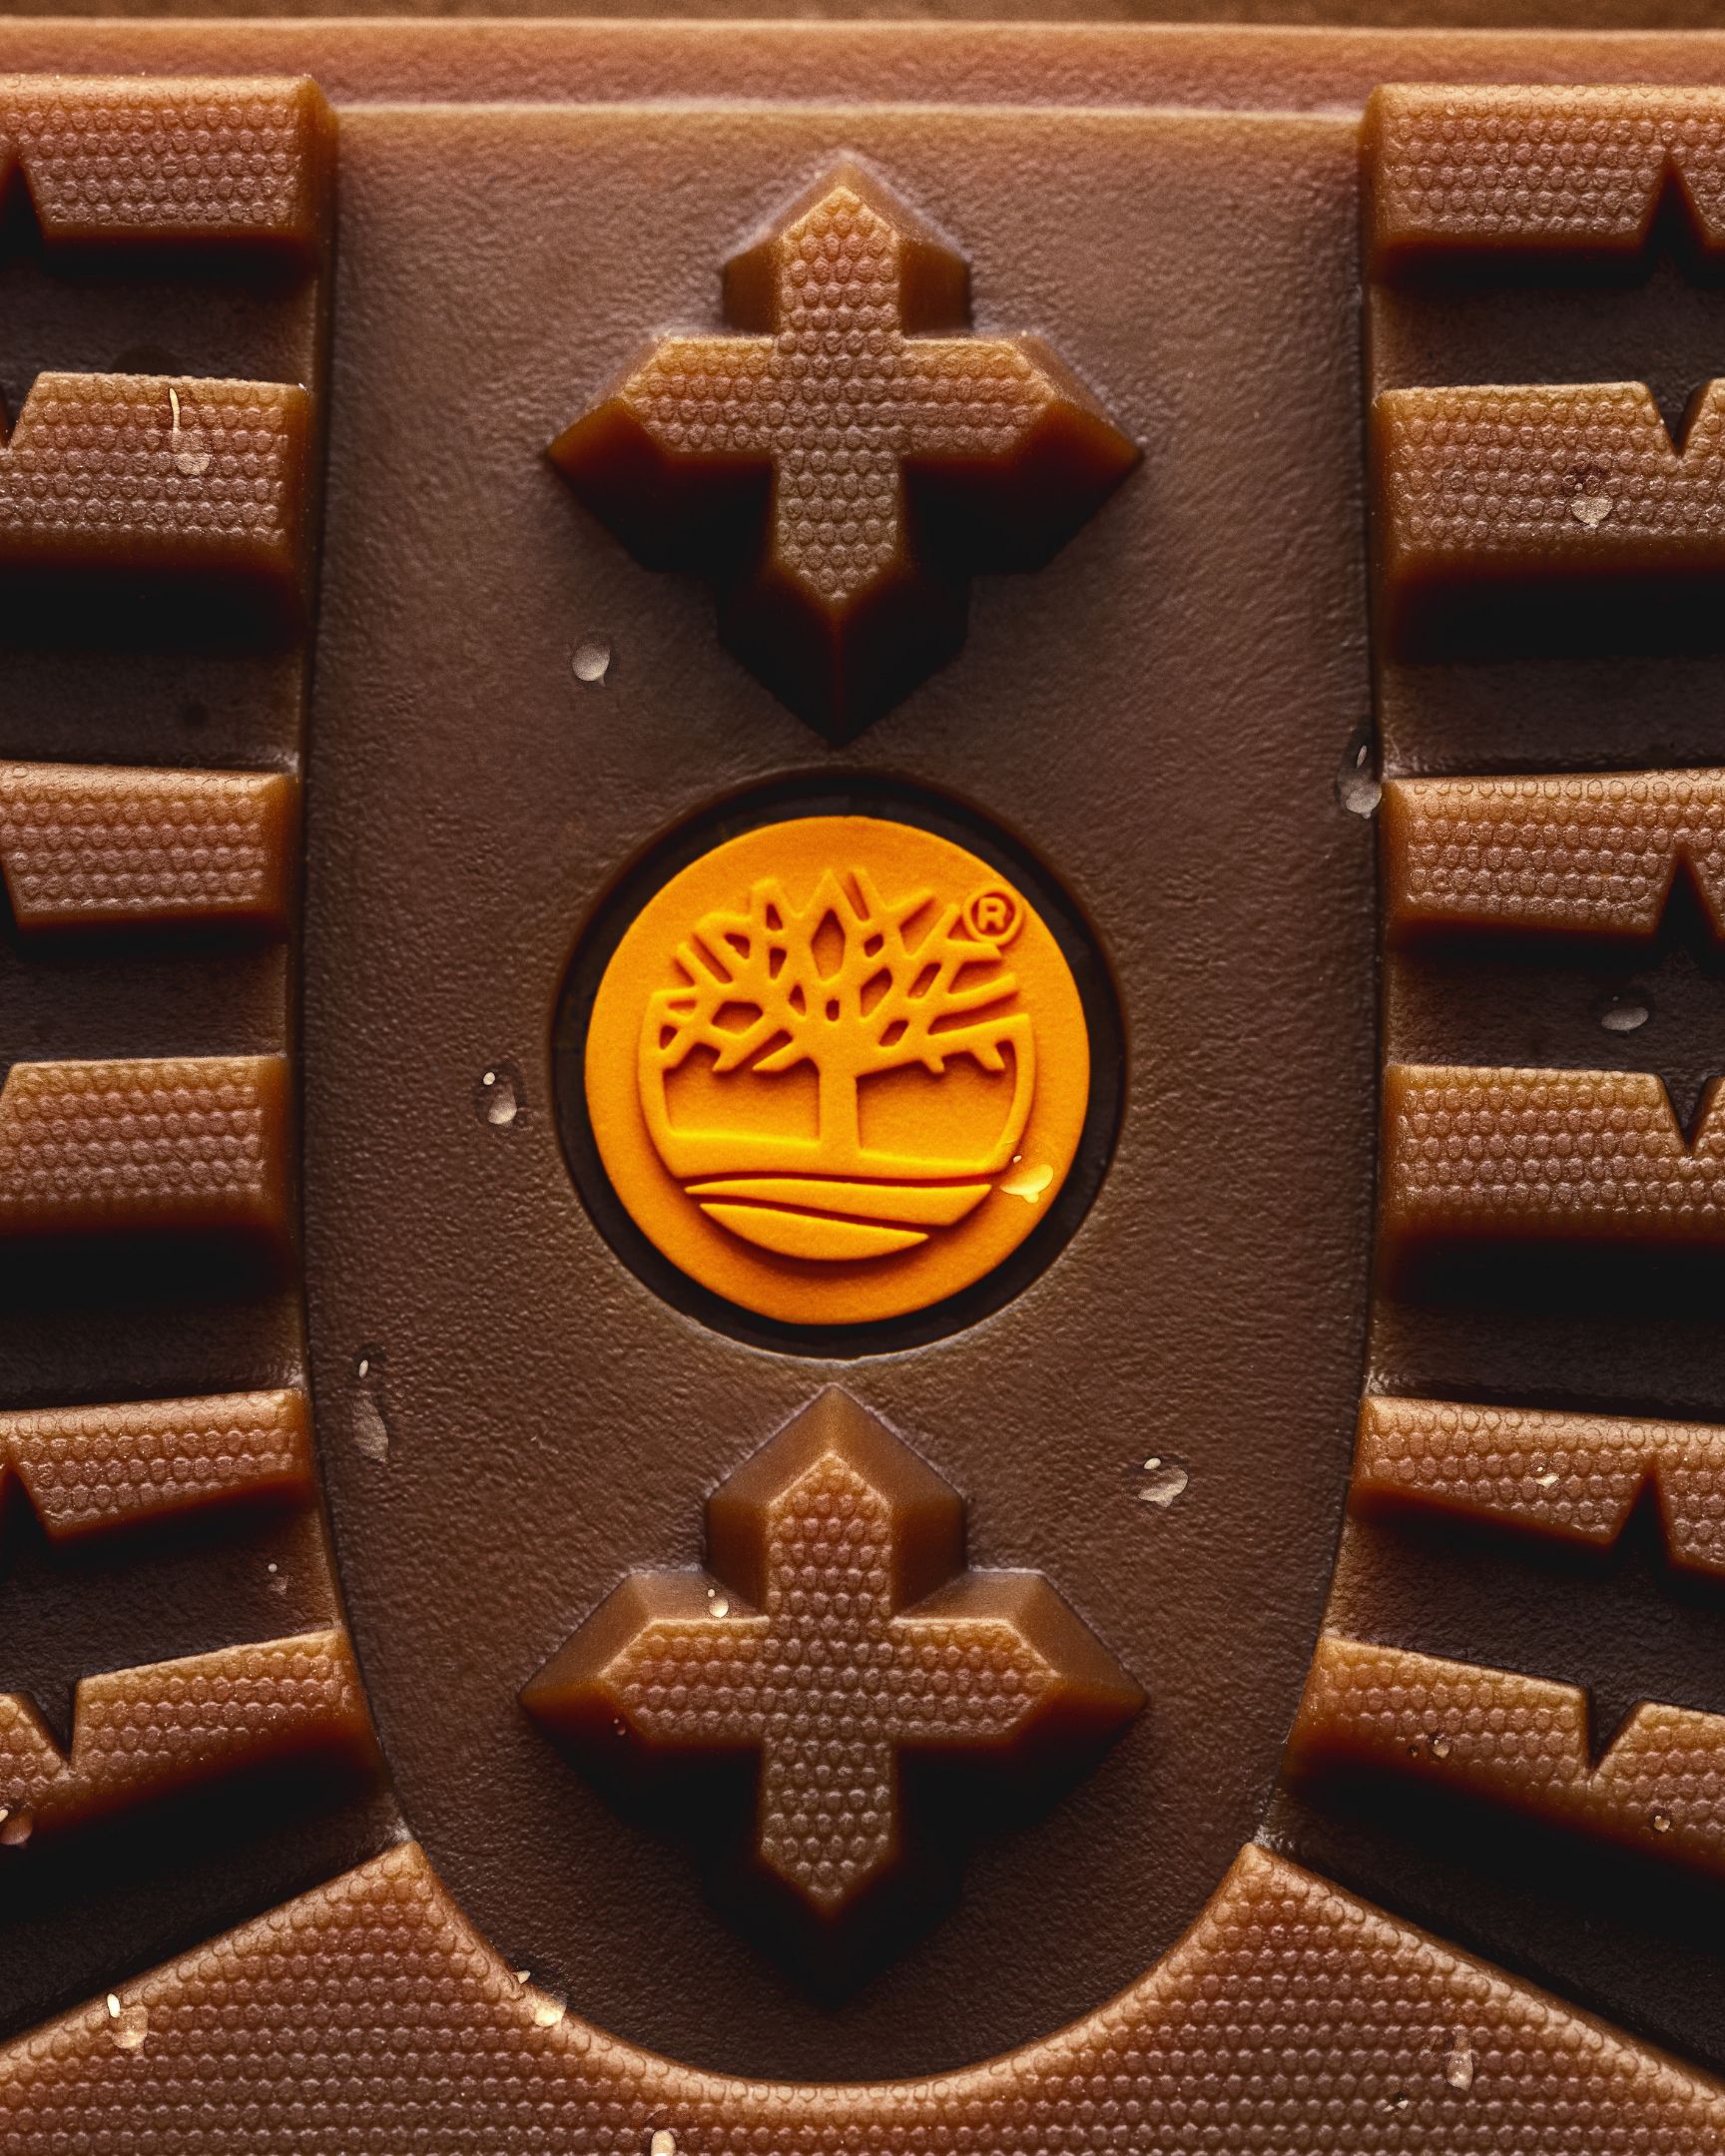 Sole of timberland boot with timberland logo